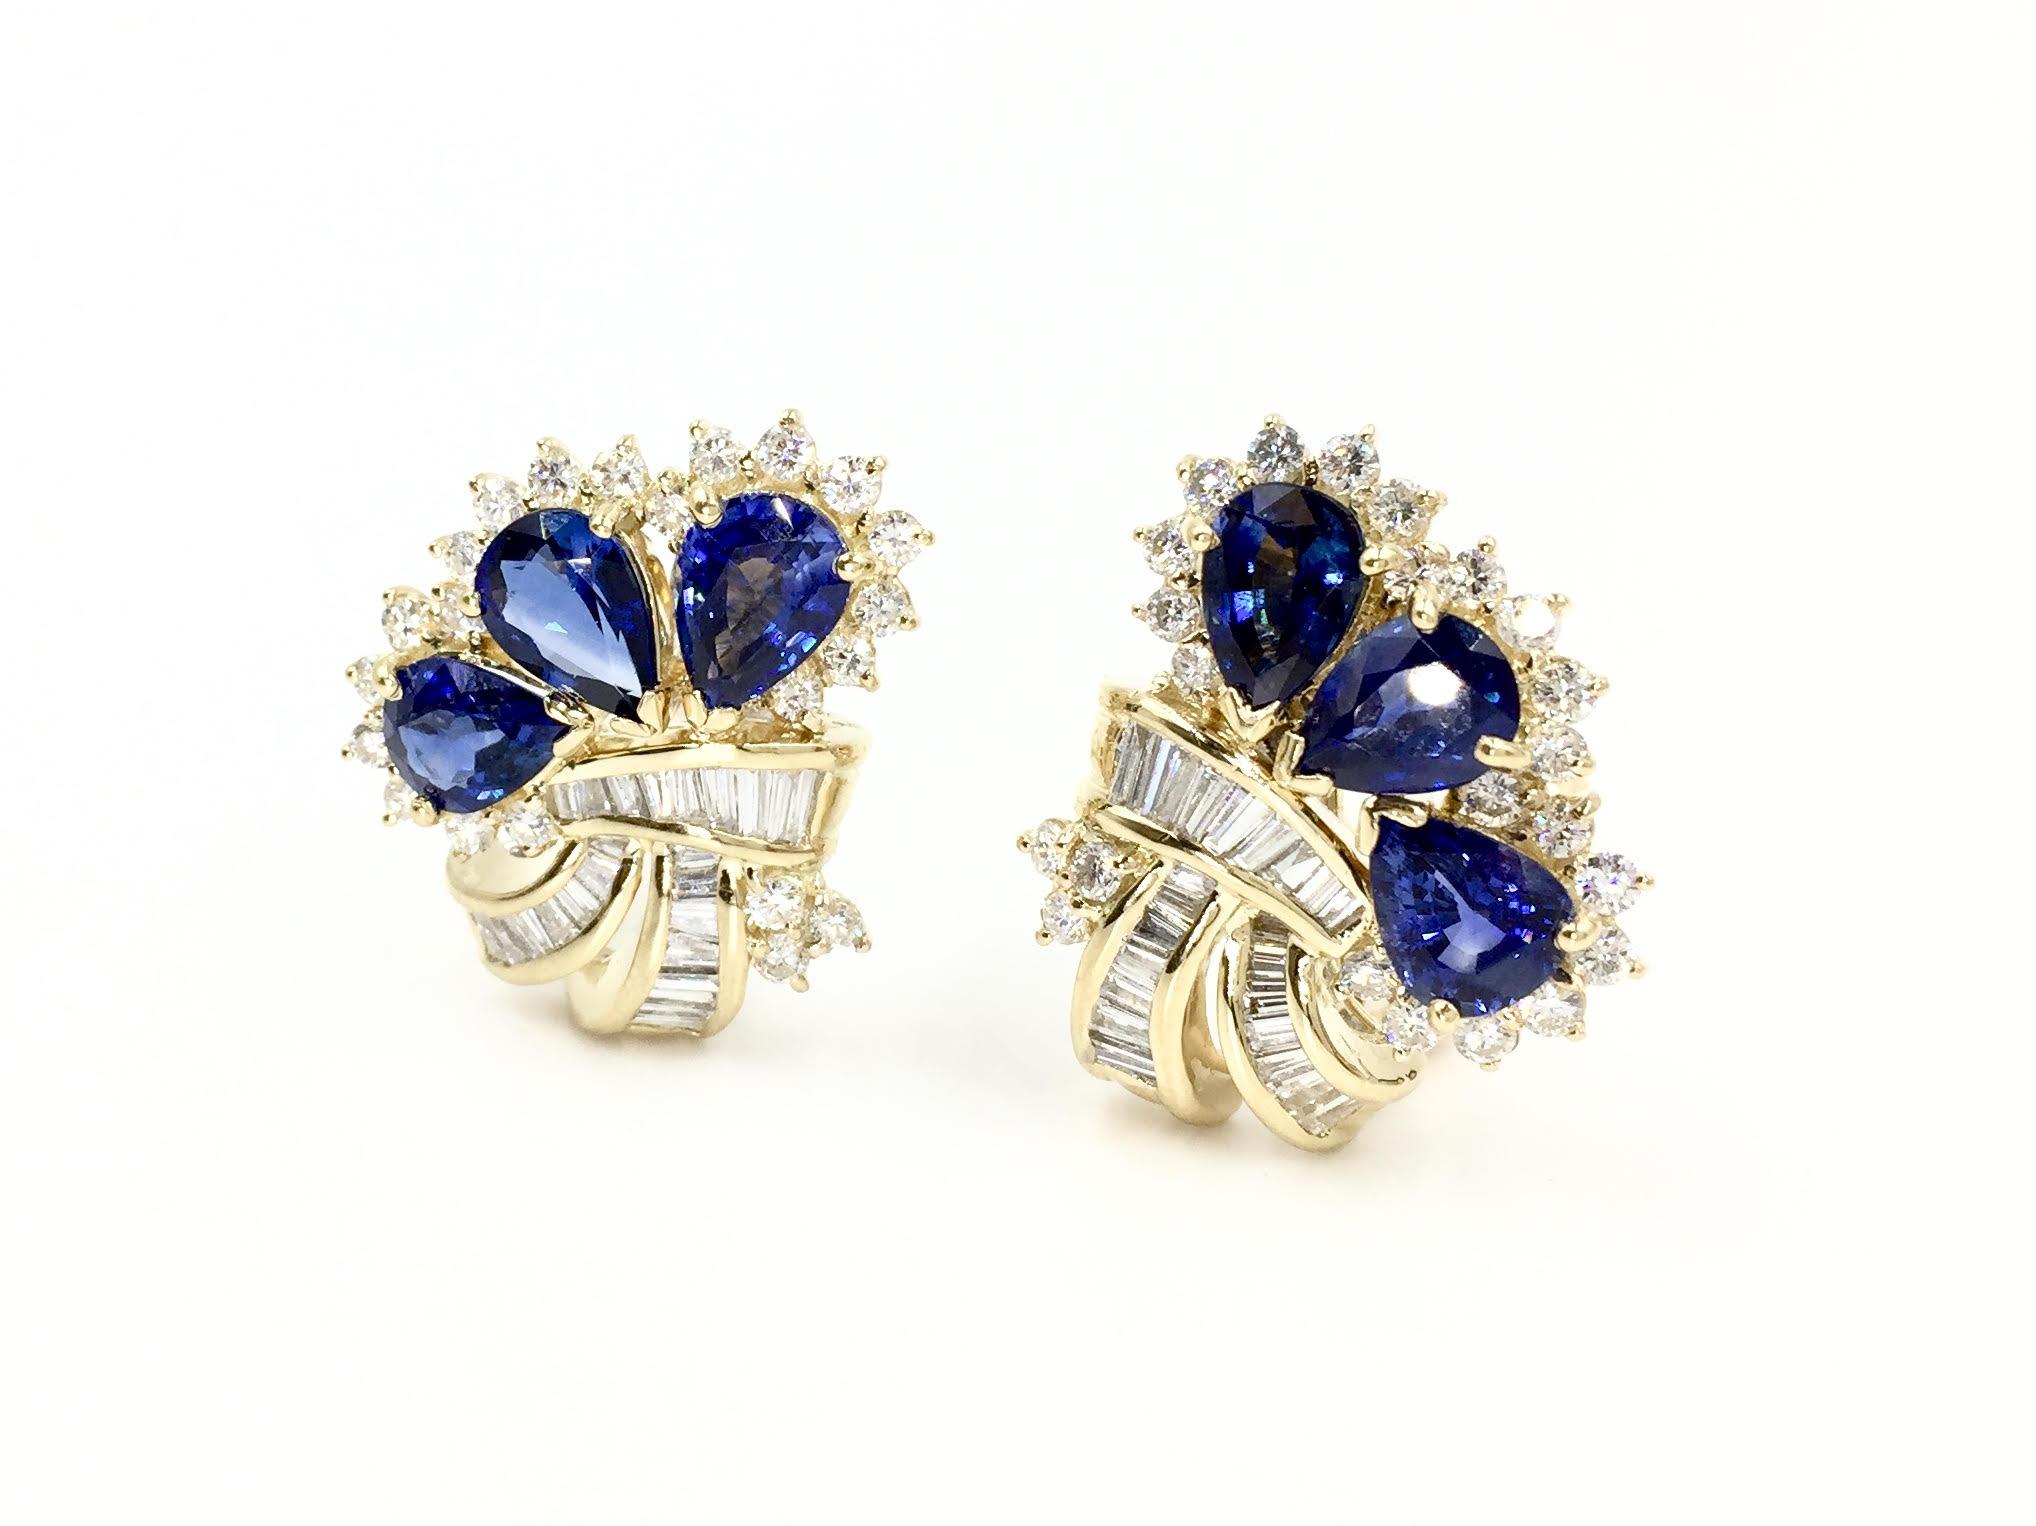 Stylish sapphire and diamond earrings that make a statement and fan the ear beautifully. Earrings hug the ear very comfortably with collapsible posts (if clip-on style is needed) and omega lever backs. Six gorgeous, high quality pear shaped blue